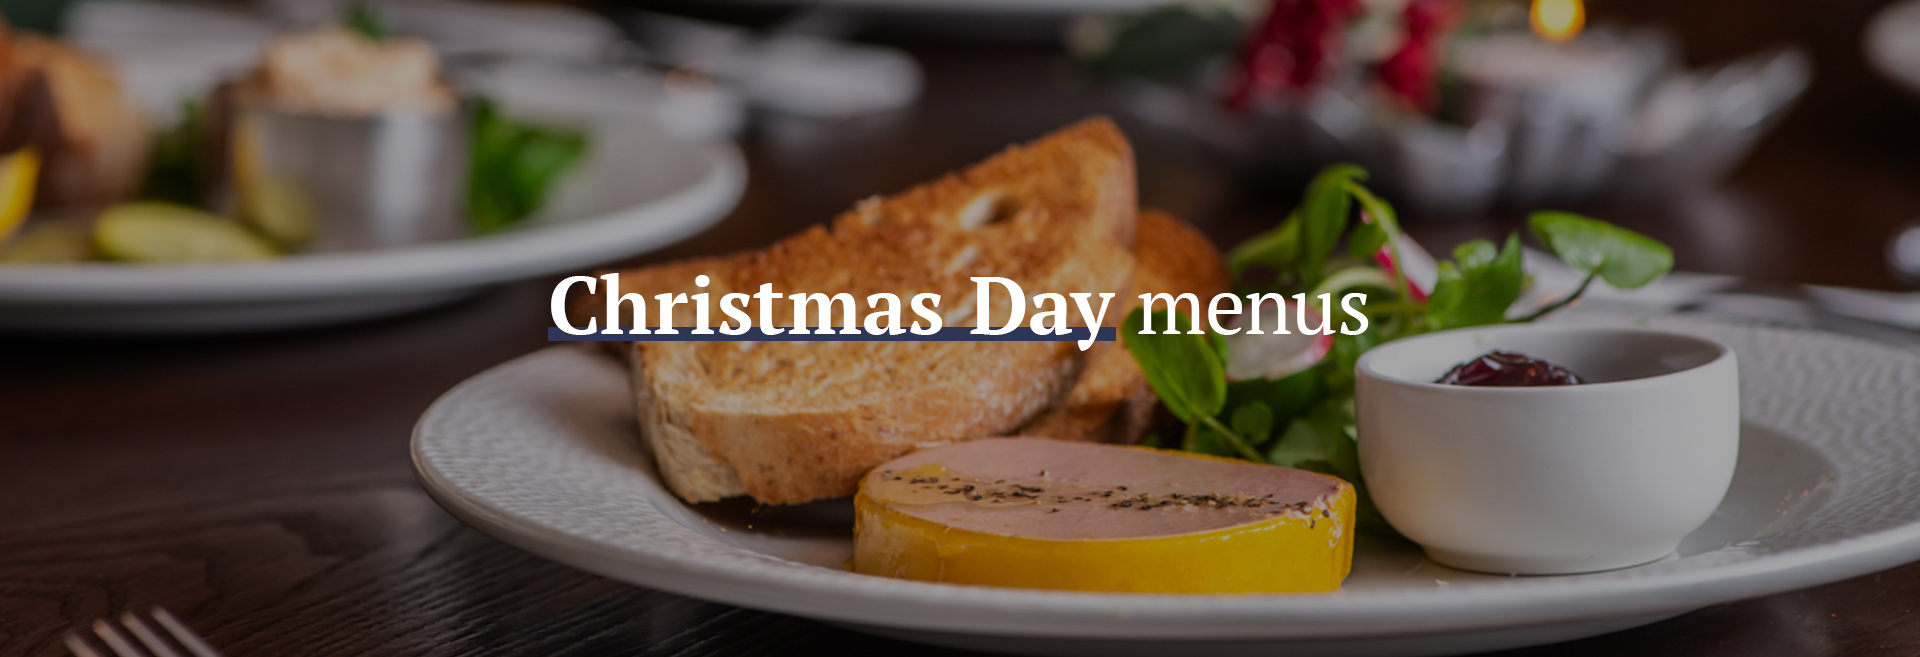 Christmas Day Menu at The Alwyne Castle